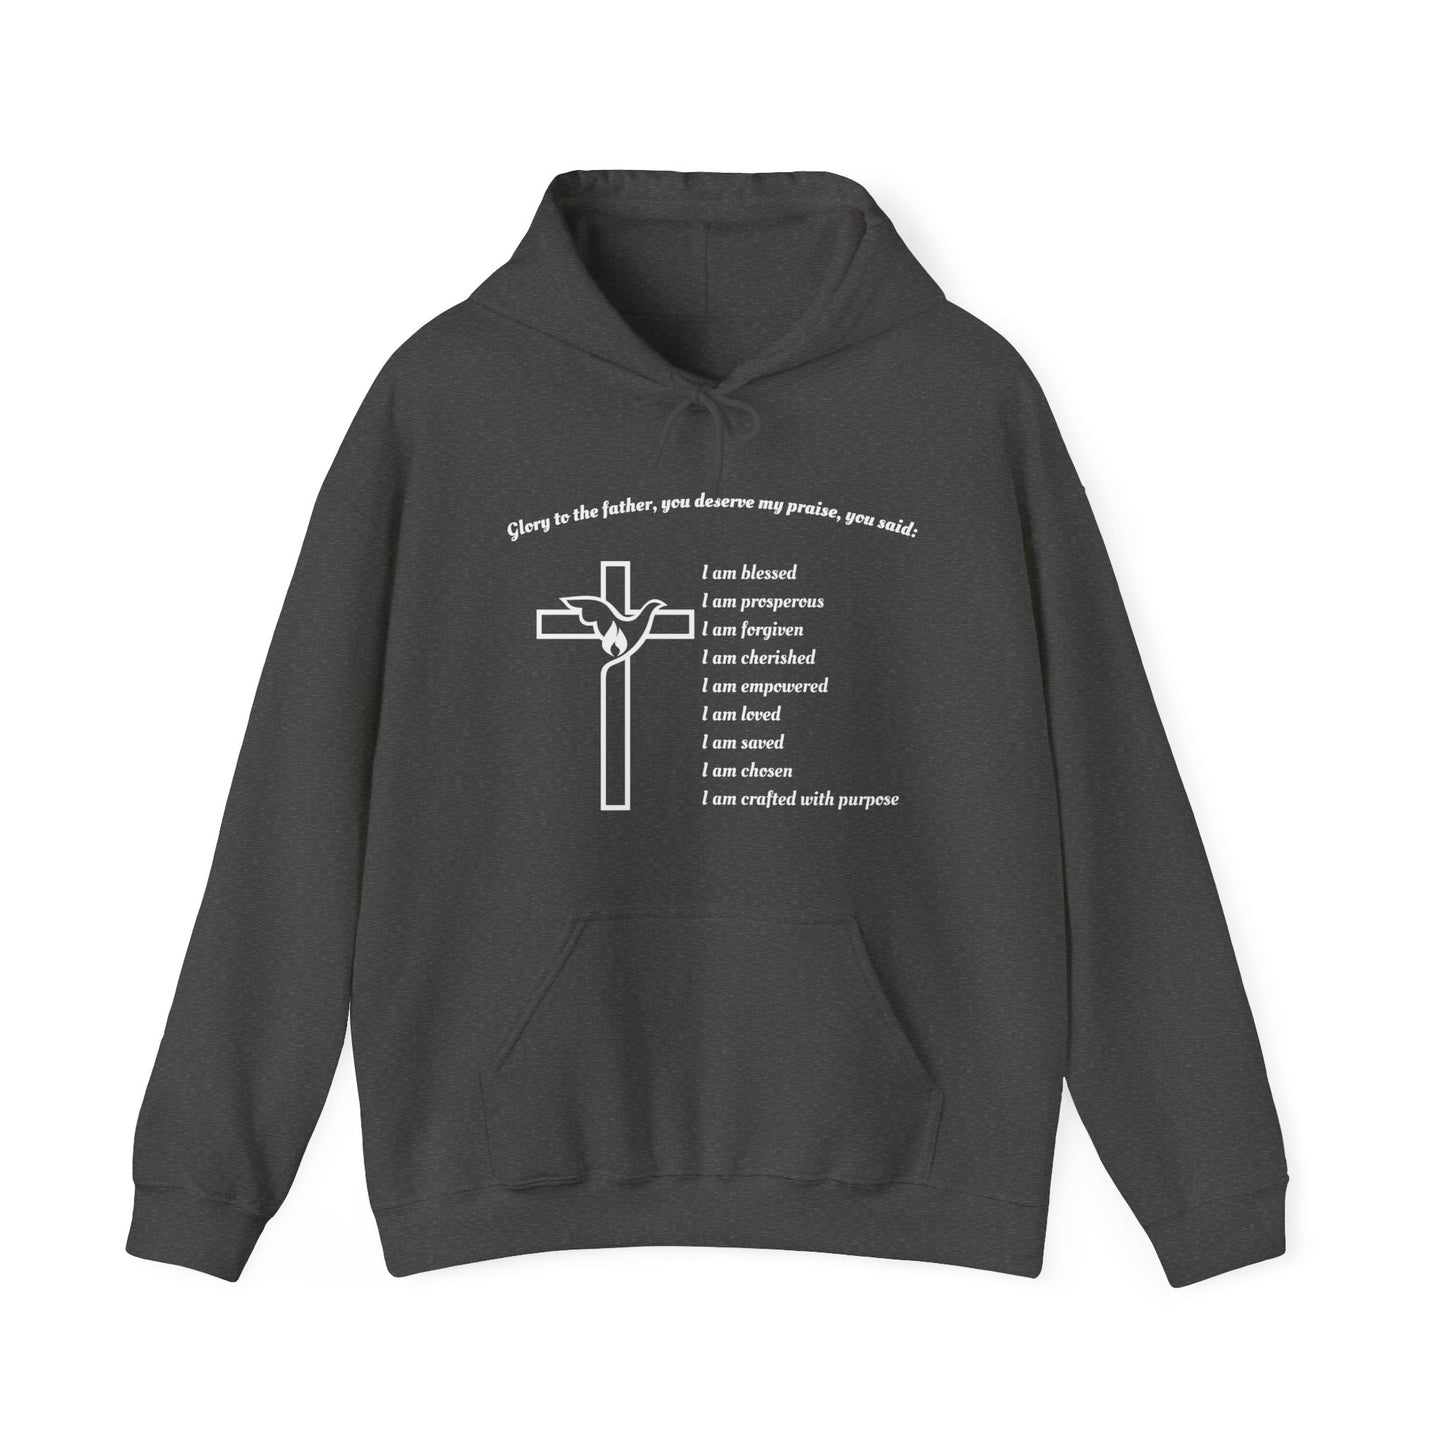 I am Glory to the Father Hooded Sweatshirt Unisex Cozy Heavy Blend48